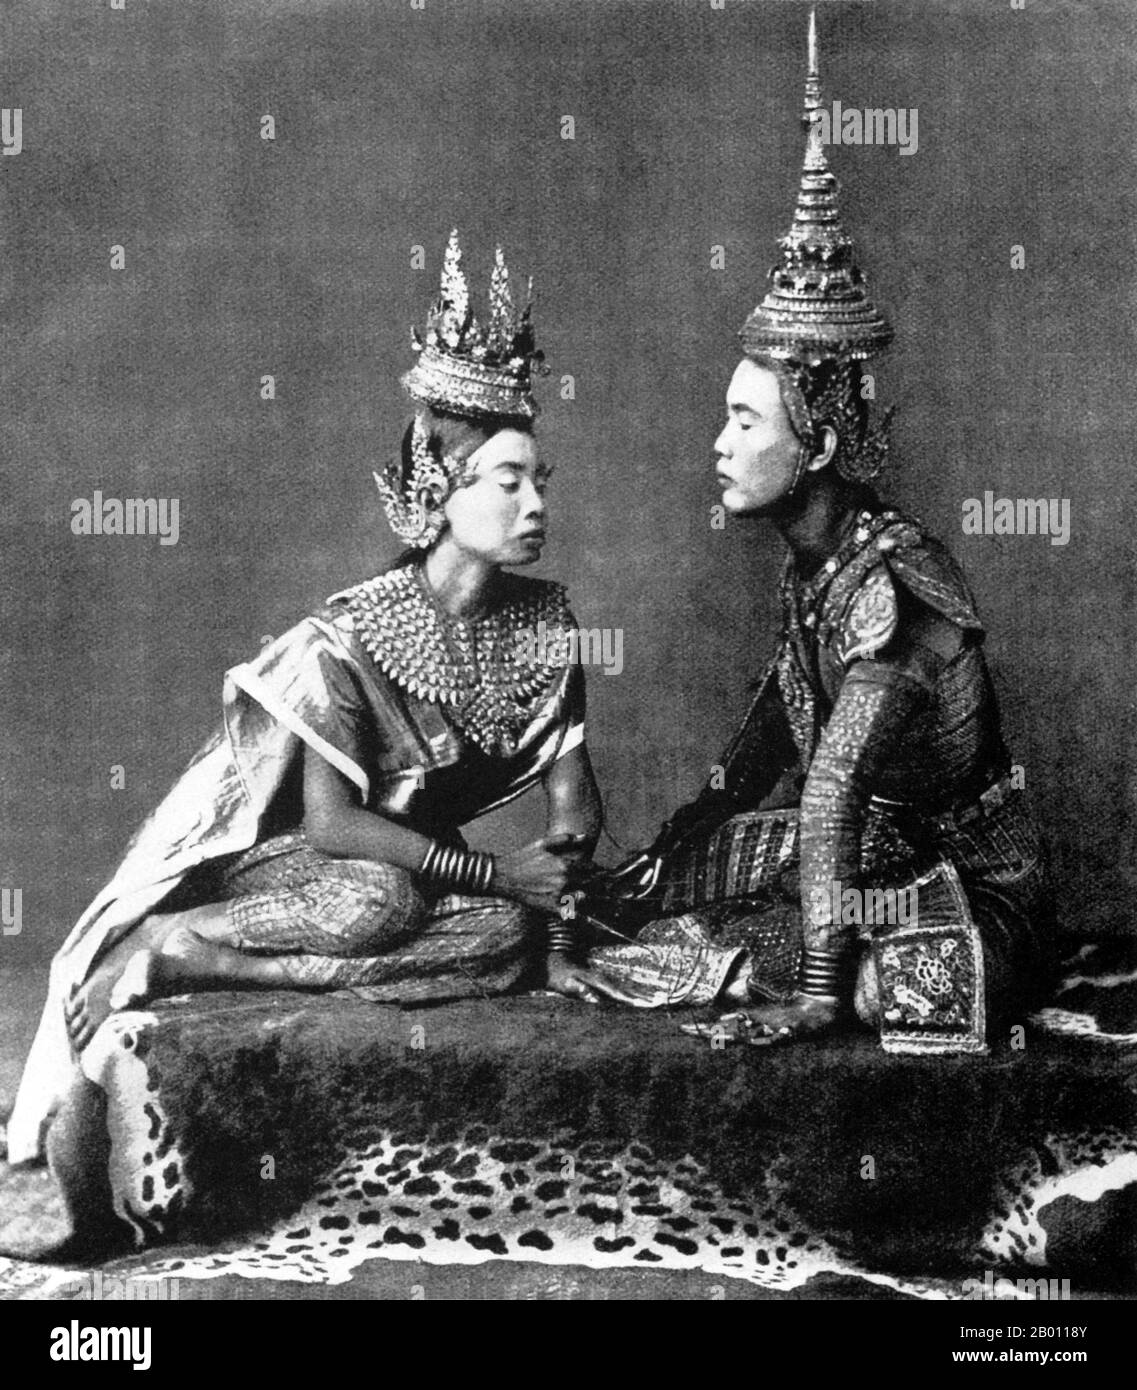 Thailand: Two actors enact the farewell scene from the Siamese play ‘I Nao’, c. 1900.   The Siamese were avid theatre-goers at the turn of the 20th century. Mime, dance, plays and shadow puppetry were all very popular. Many of the stage plays involved dancers, mostly female, who adorned themselves in jewellery and exhibited lithe movements portraying beauty and flexibility, especially in bending the fingers back. The most common plays were called ‘khon’, which essentially feature scenes from the ‘Ramakien’, the Thai version of the Hindu epic ‘The Ramayana’. Stock Photo